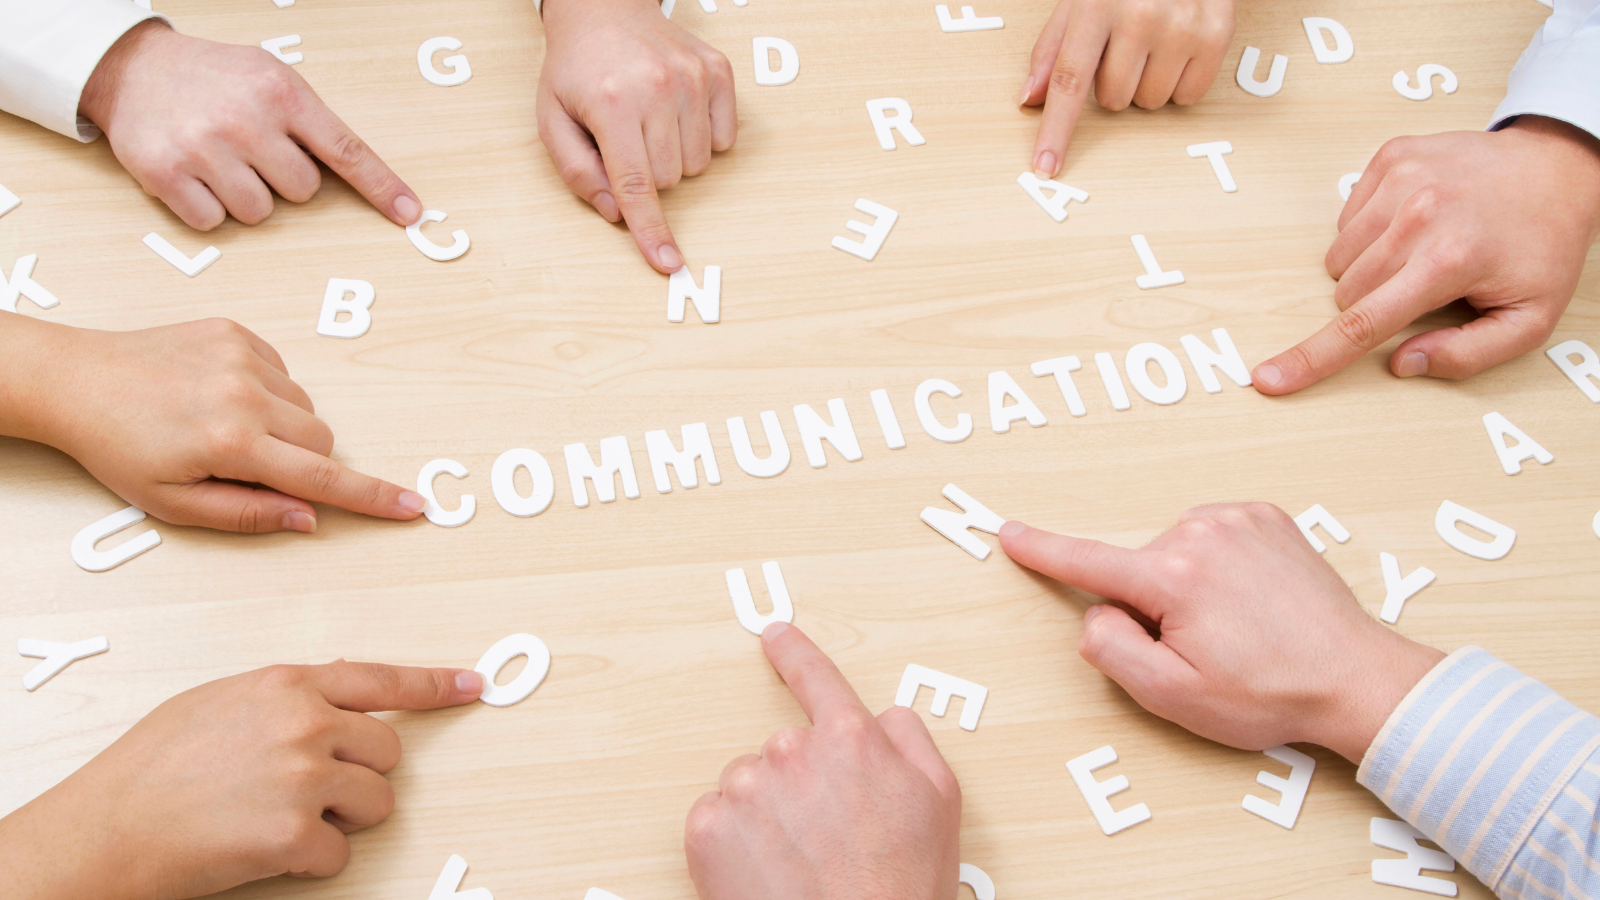 7 Cs of Communication That Salespeople Need to Master